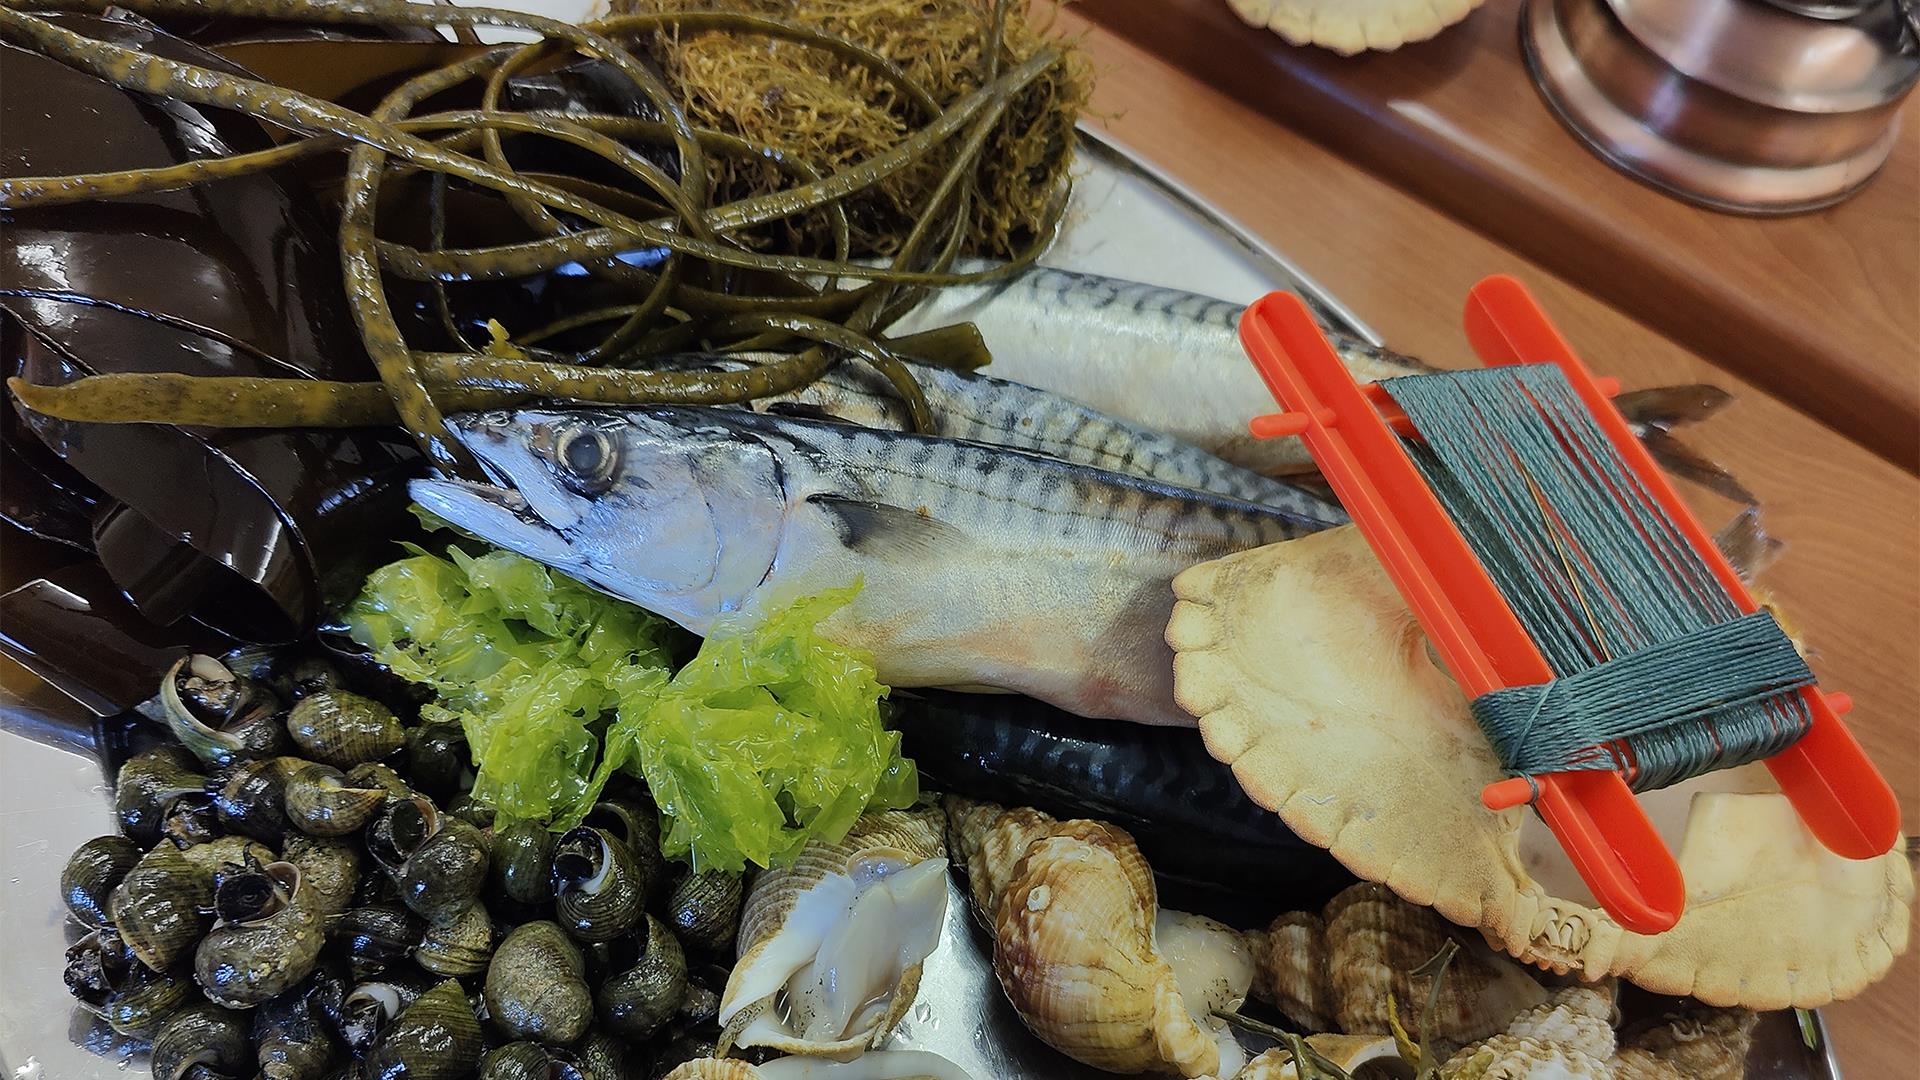 a plate of fresh seawood, kelp, foraged seaweeds and shells